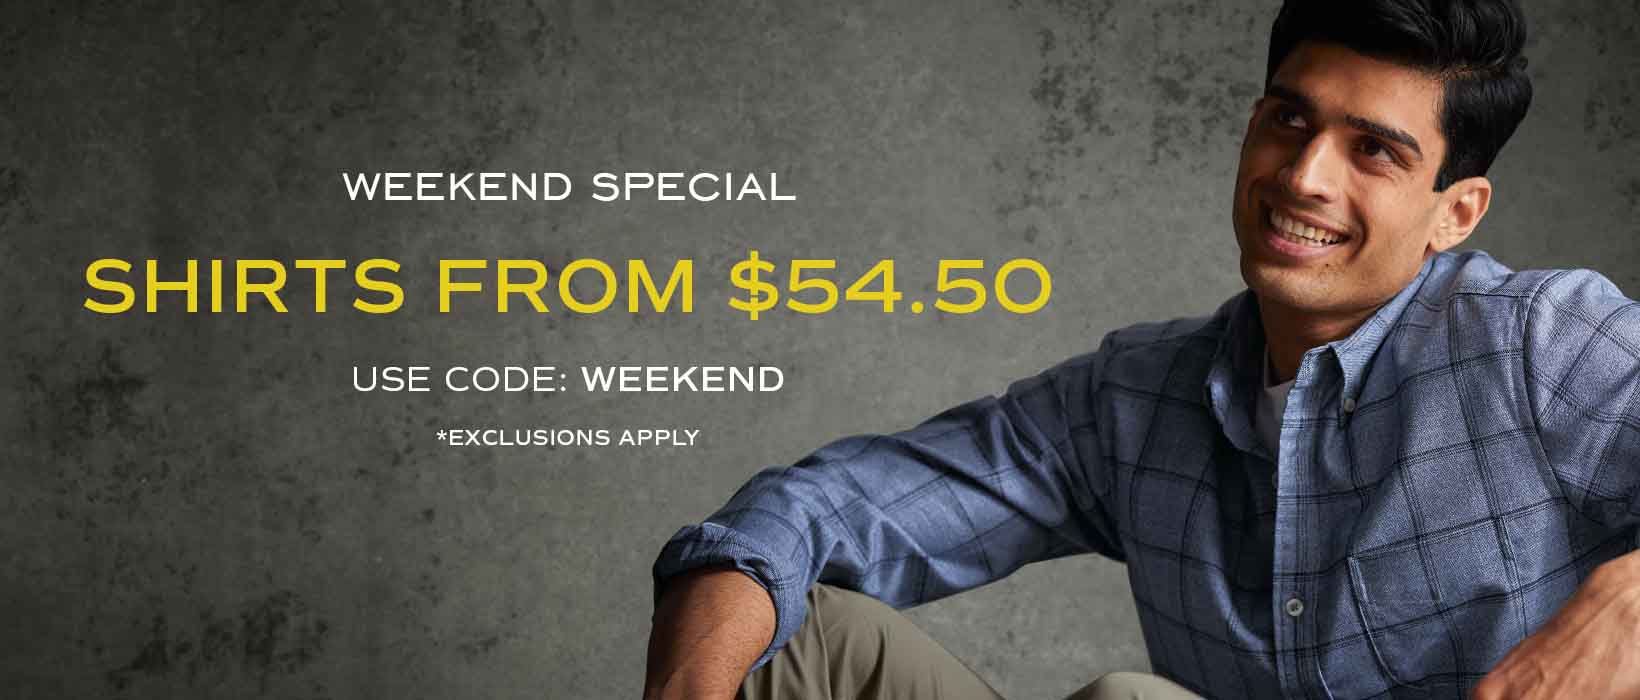 Save extra up to 50% OFF on shirts with promo code